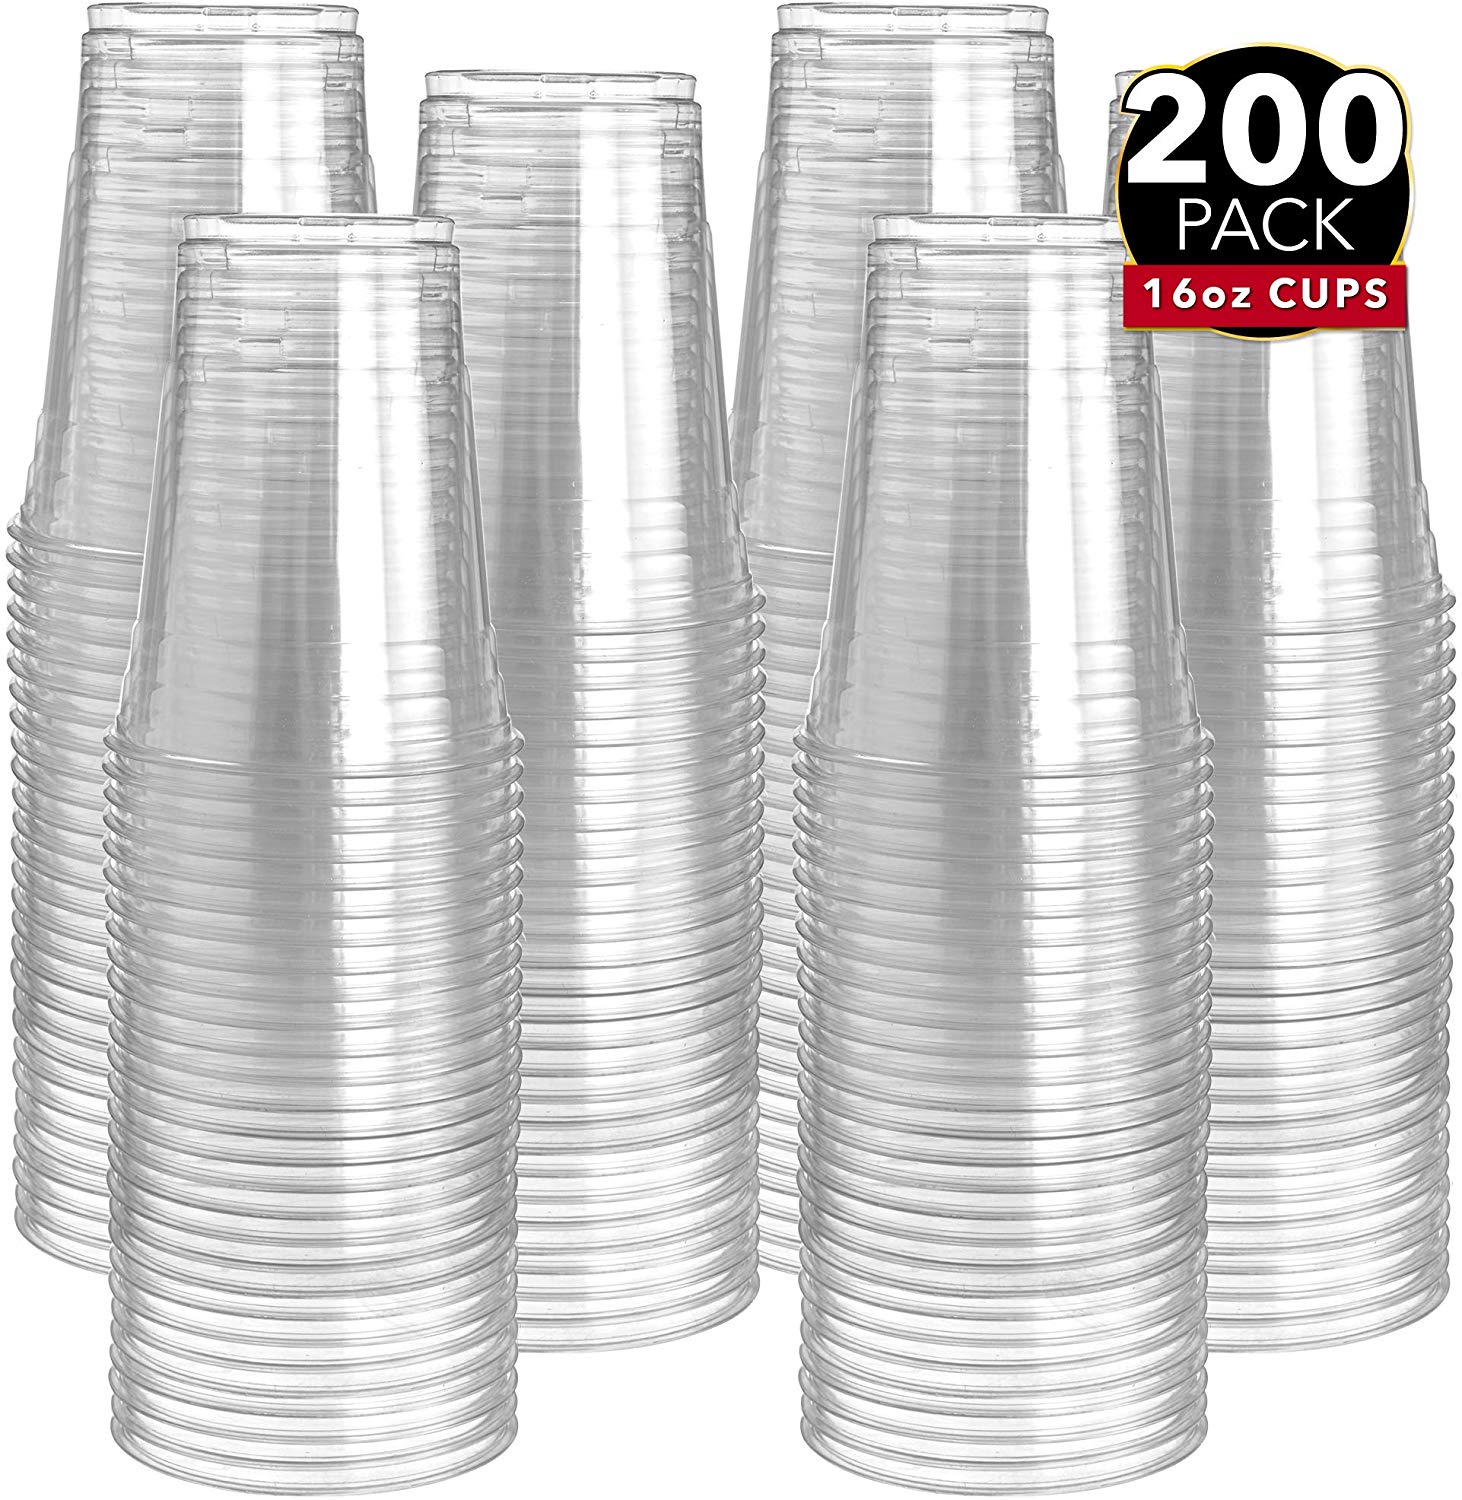 200 Clear Plastic Cups | 16 oz Plastic Cups | Clear Disposable Cups $16.14 (REG $39.99)